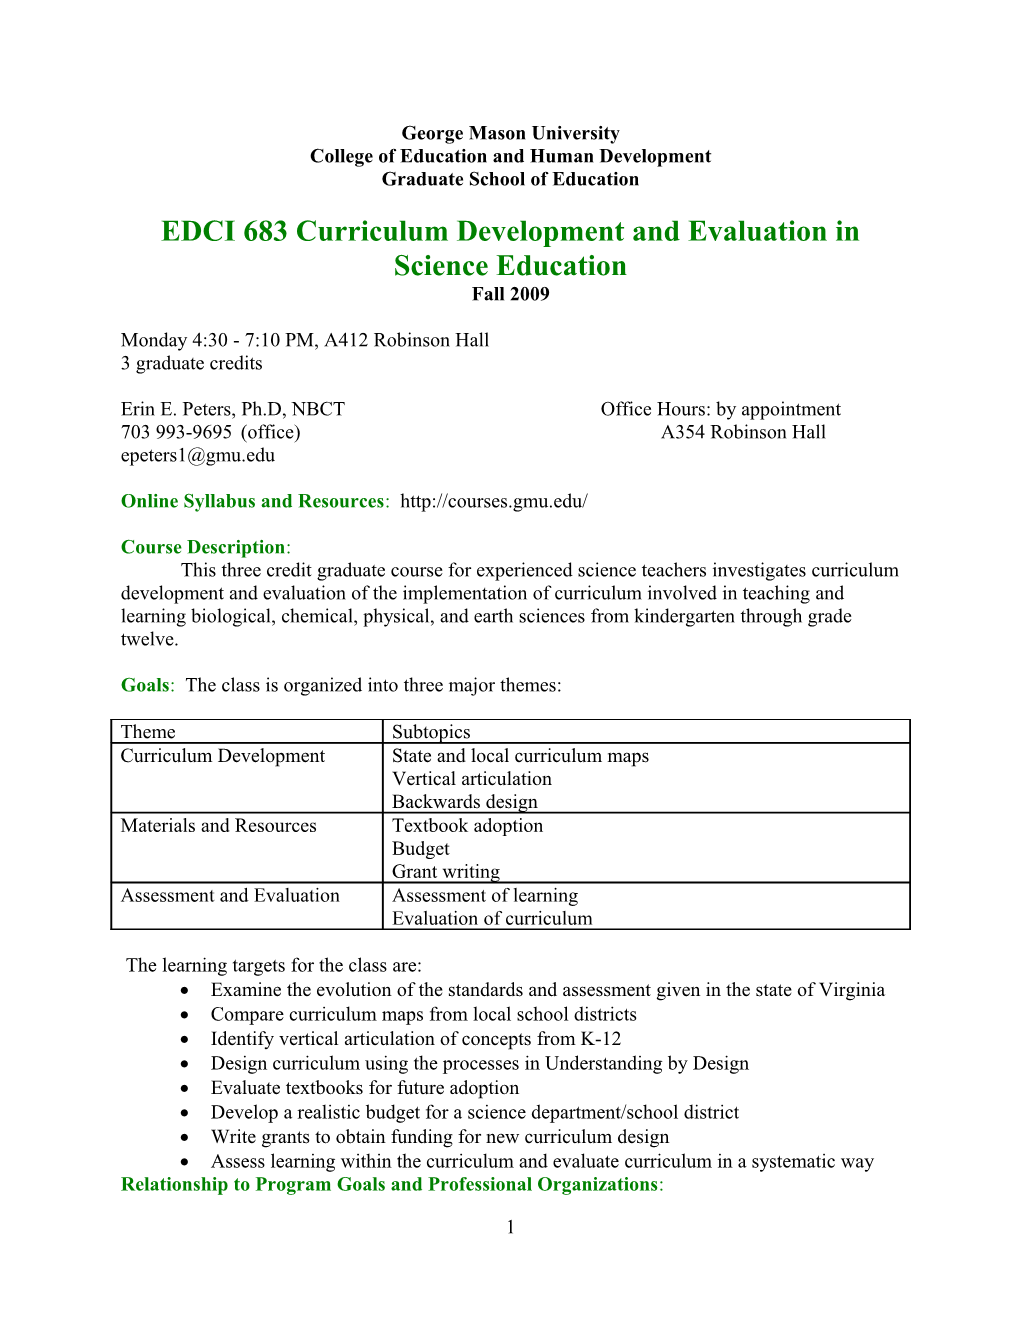 EDCI 663 Research in Science Teaching